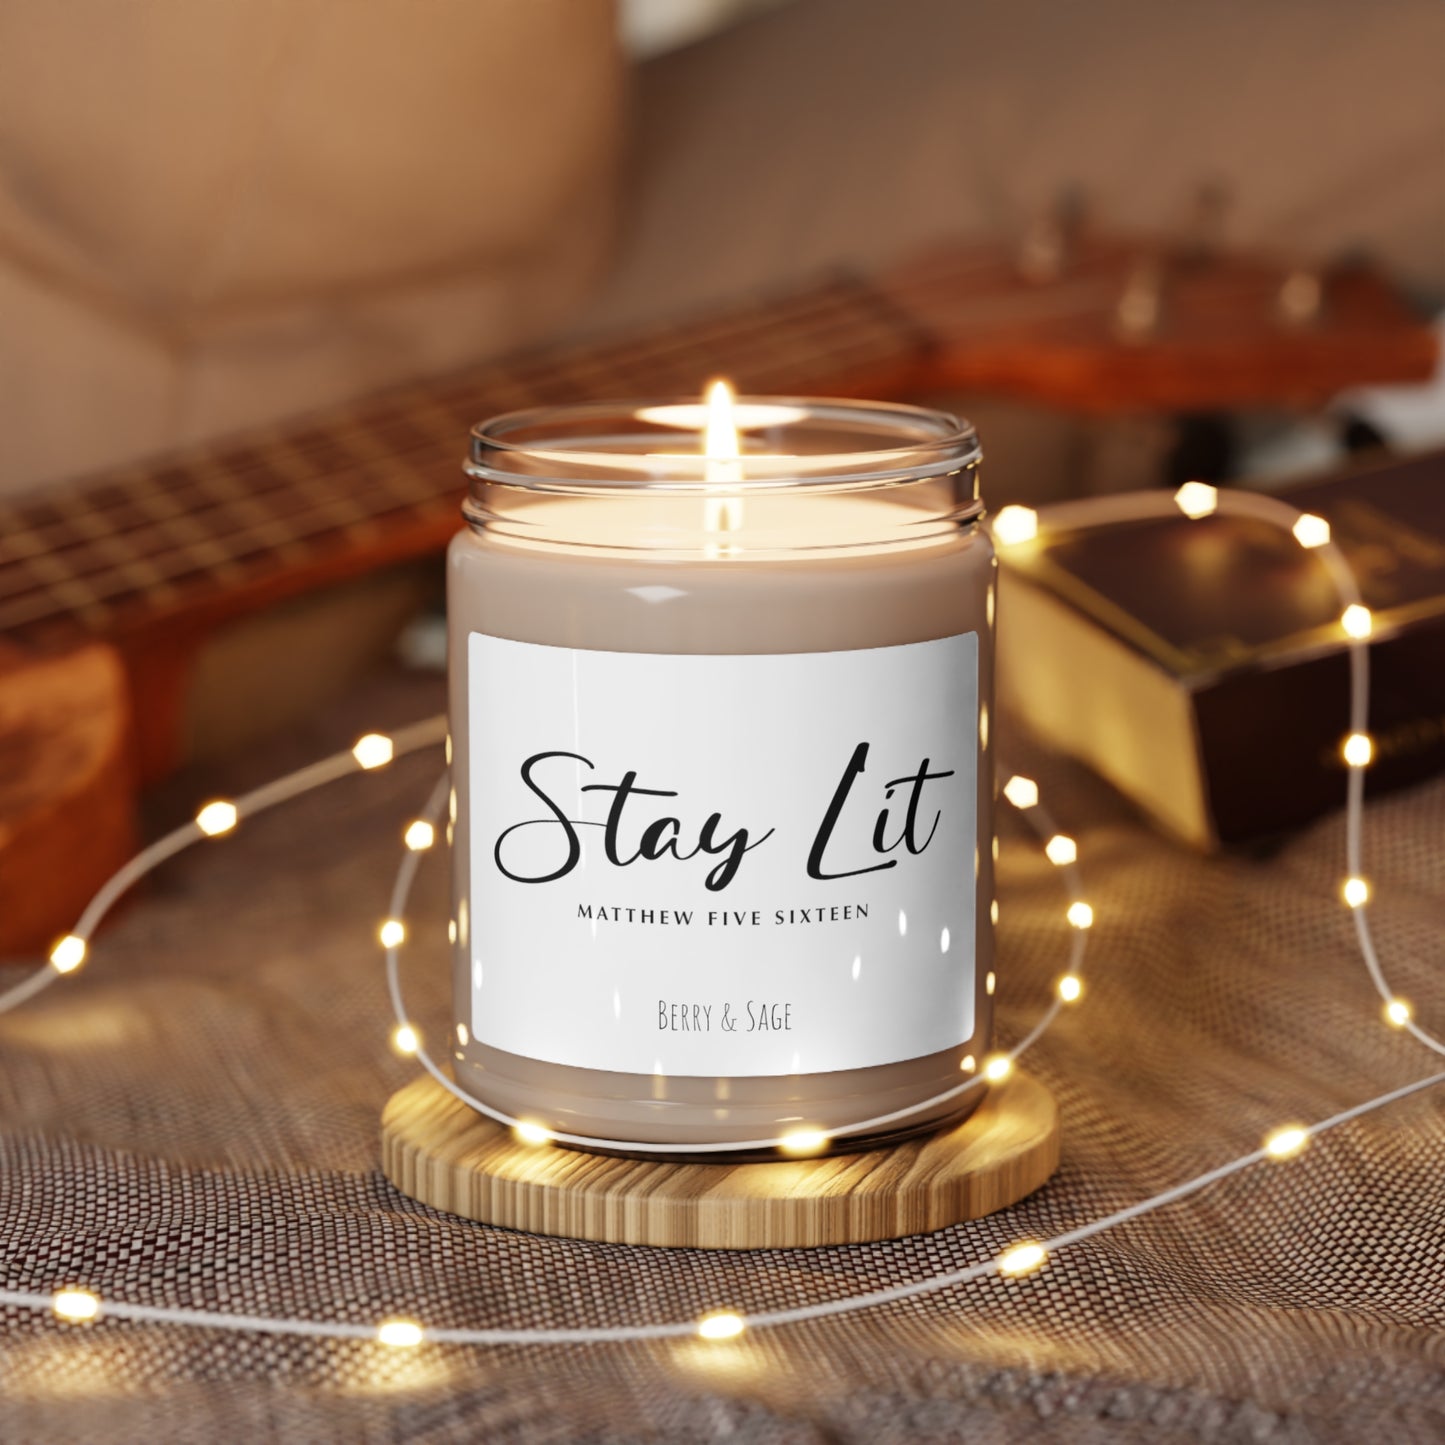 Stay Lit Scented Soy Candle, 9oz